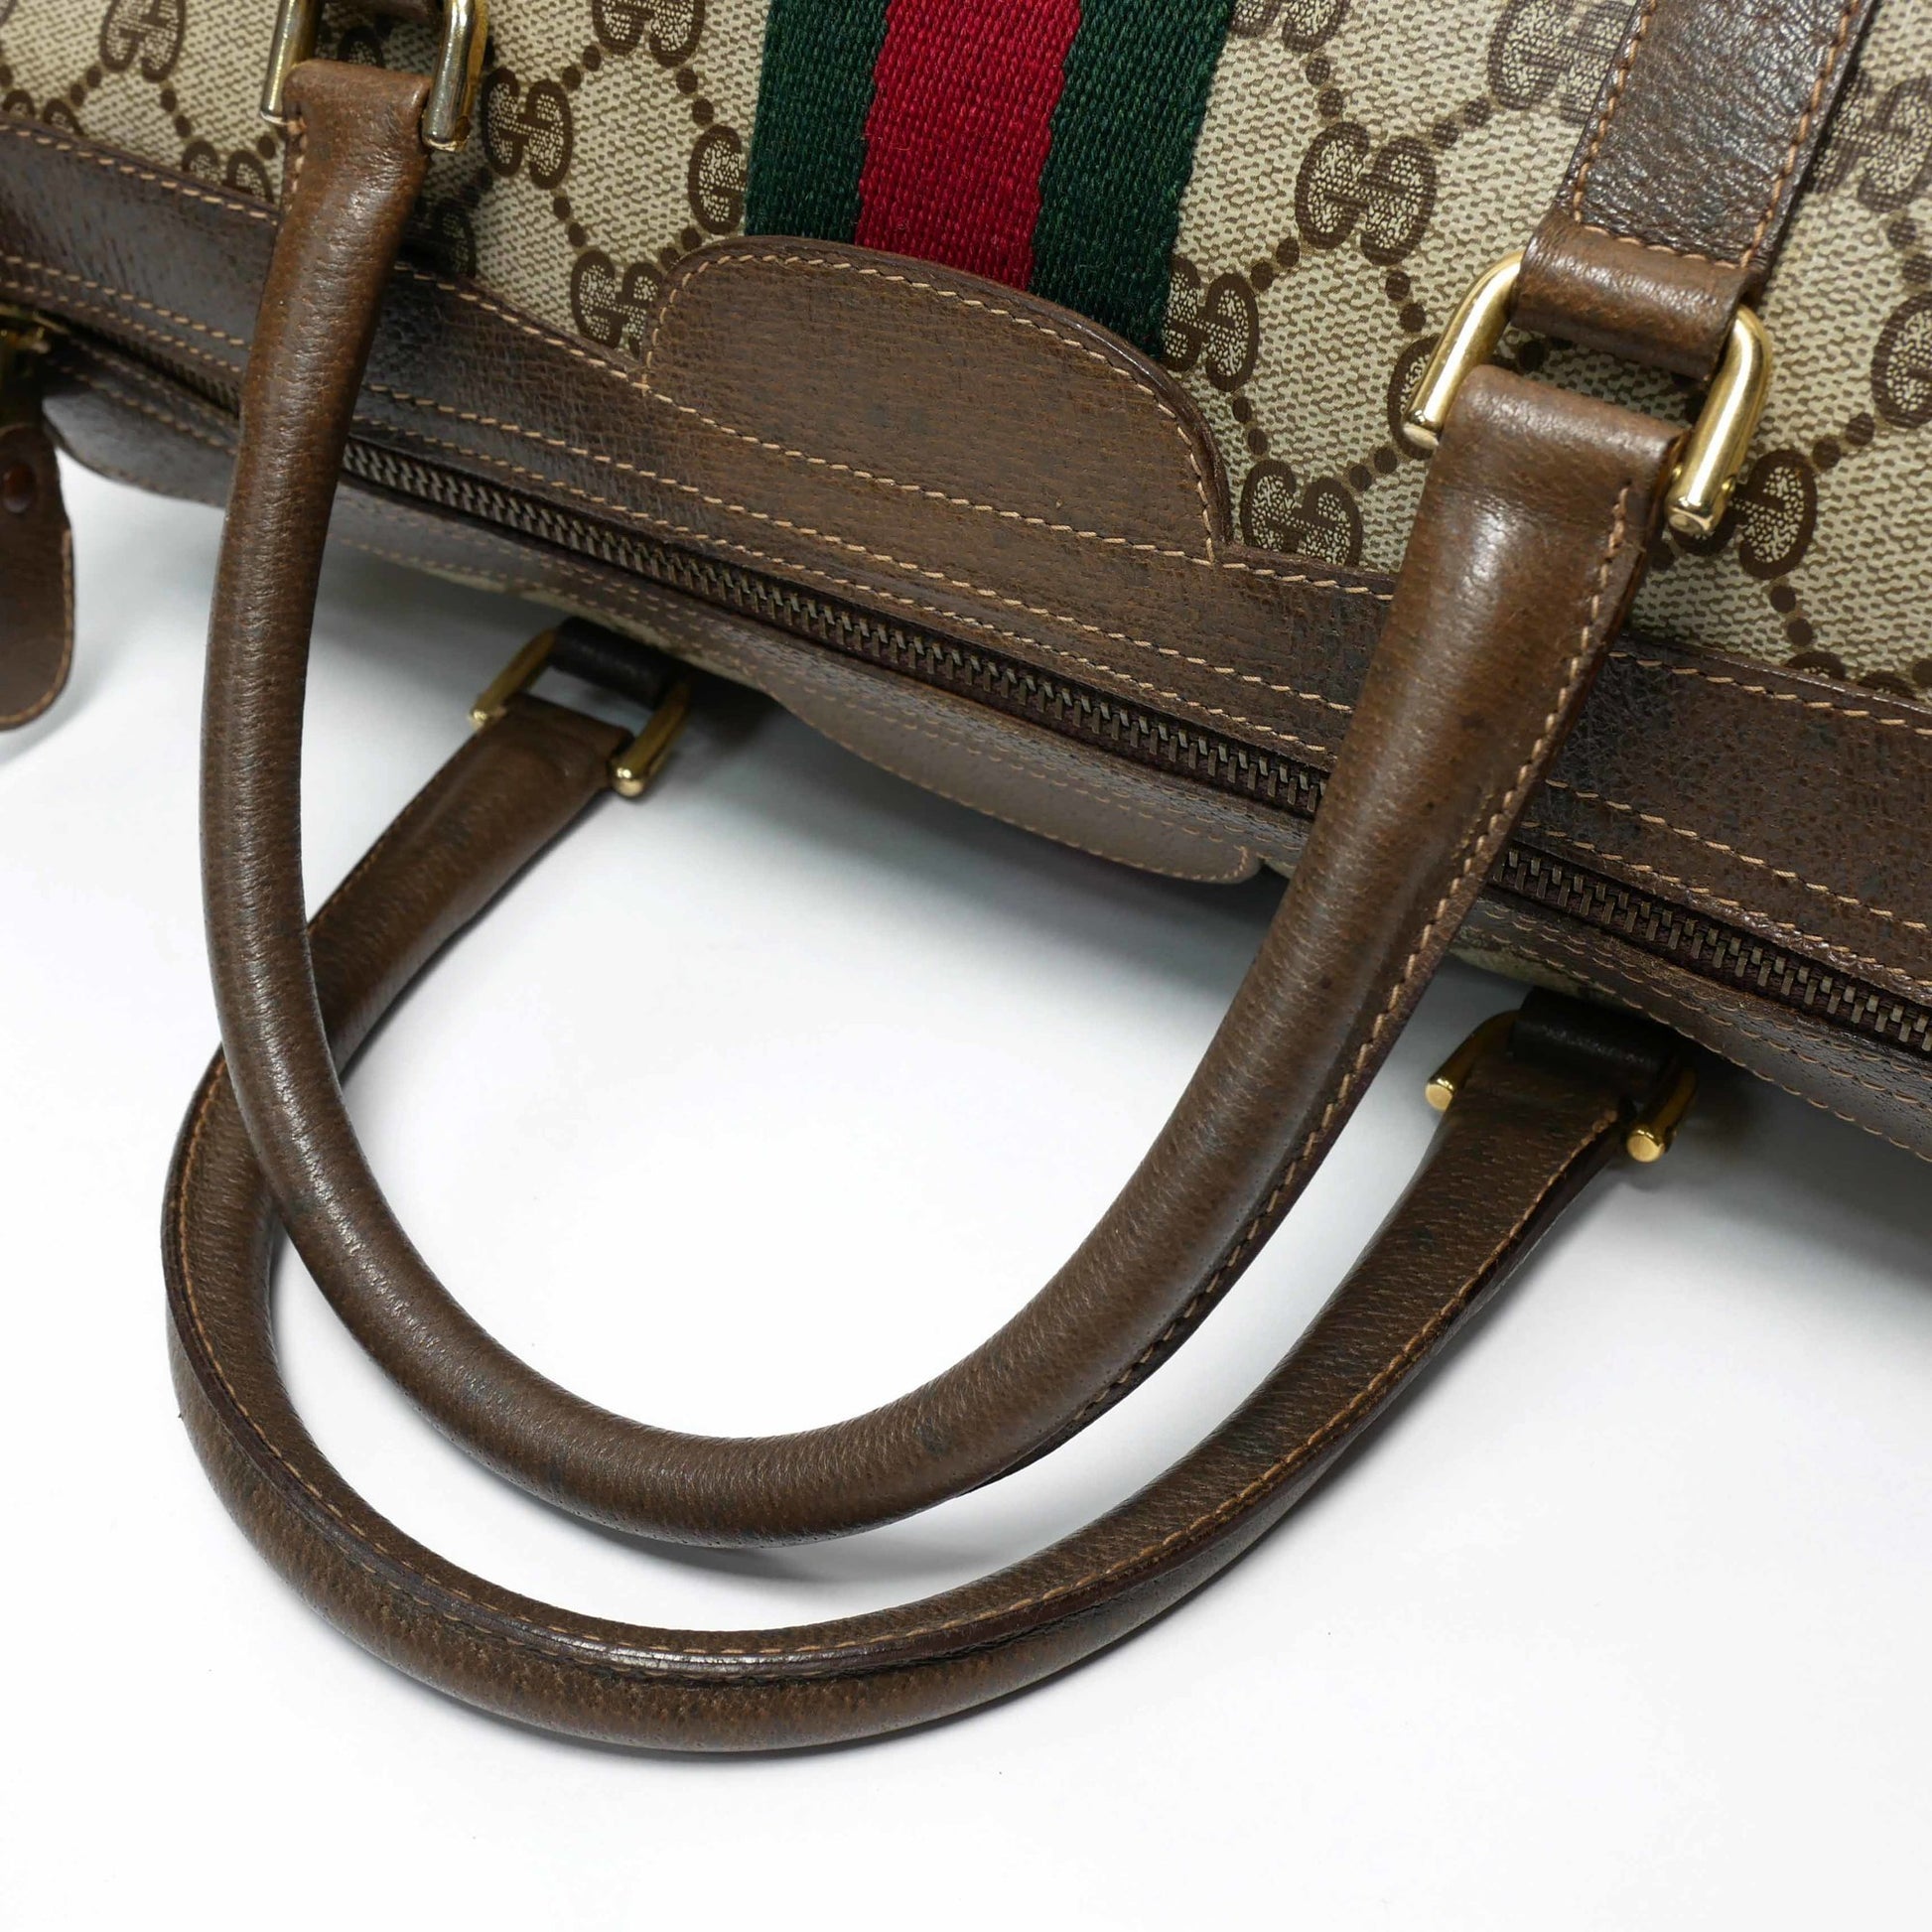 Authenticated Used GUCCI Old Gucci Vintage Mini Boston Bag Handbag Barrel  Unisex 1970's 70'S Sherry Line GG Pattern/Leather Gold Hardware Brown/Beige  